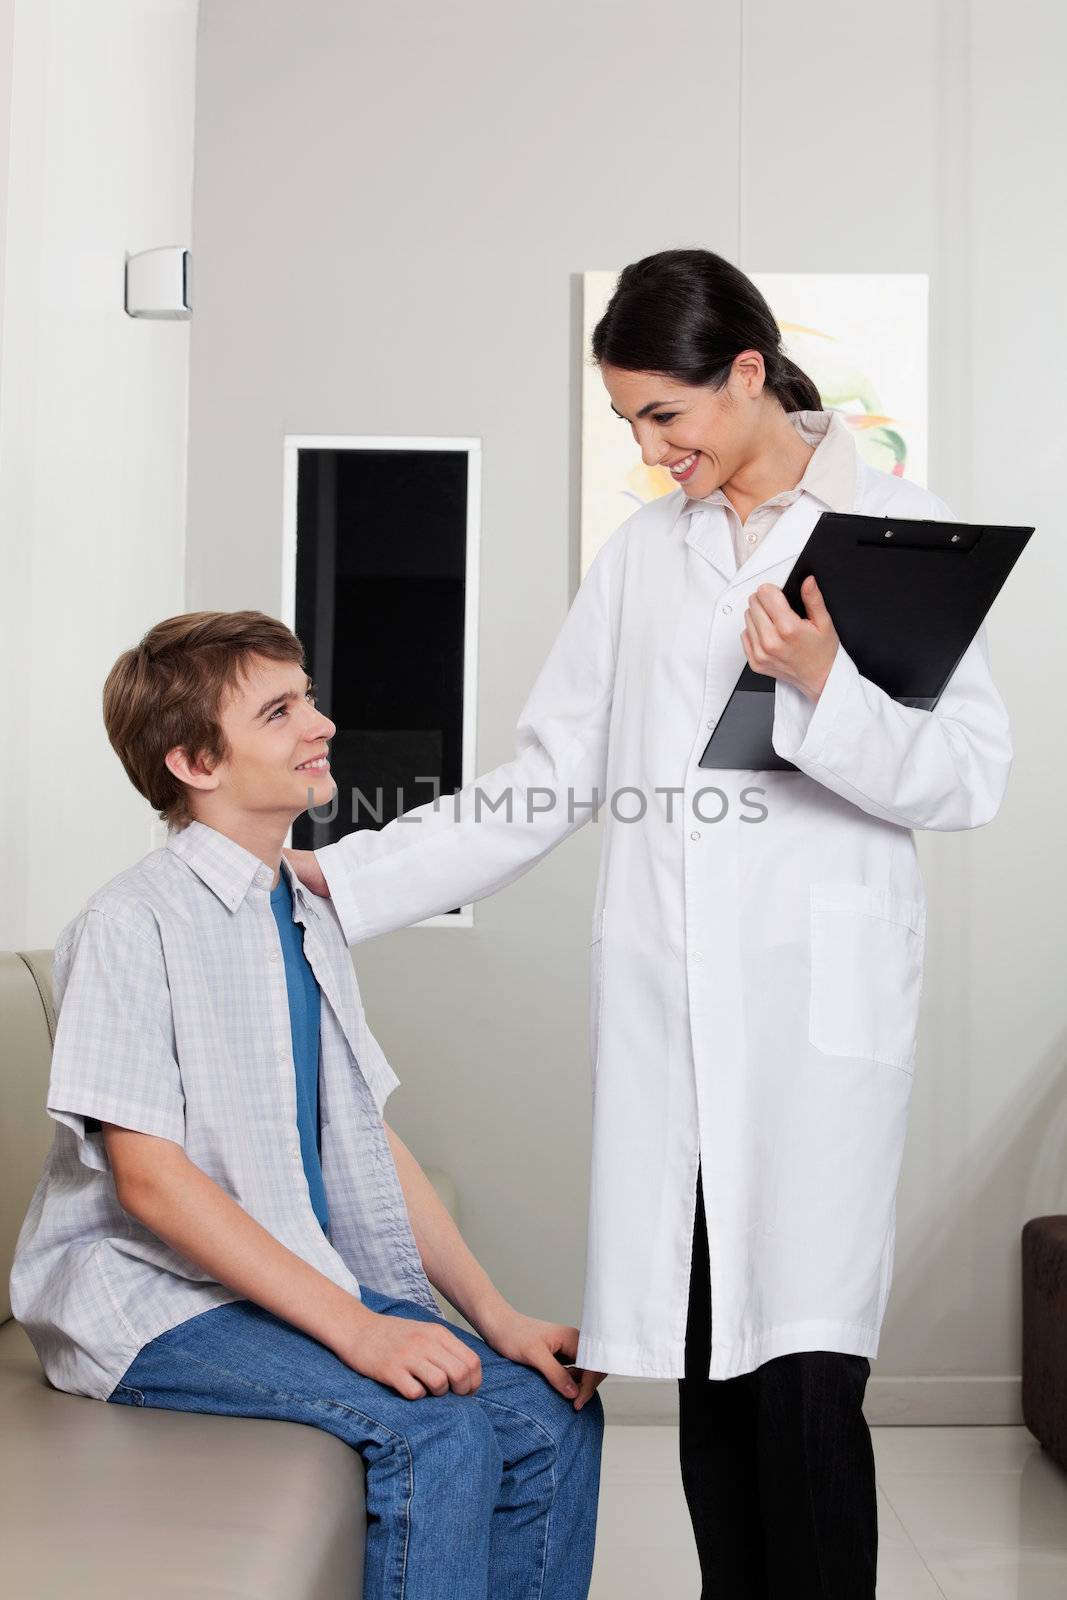 A friendly young optometrist smiling while looking at her patient